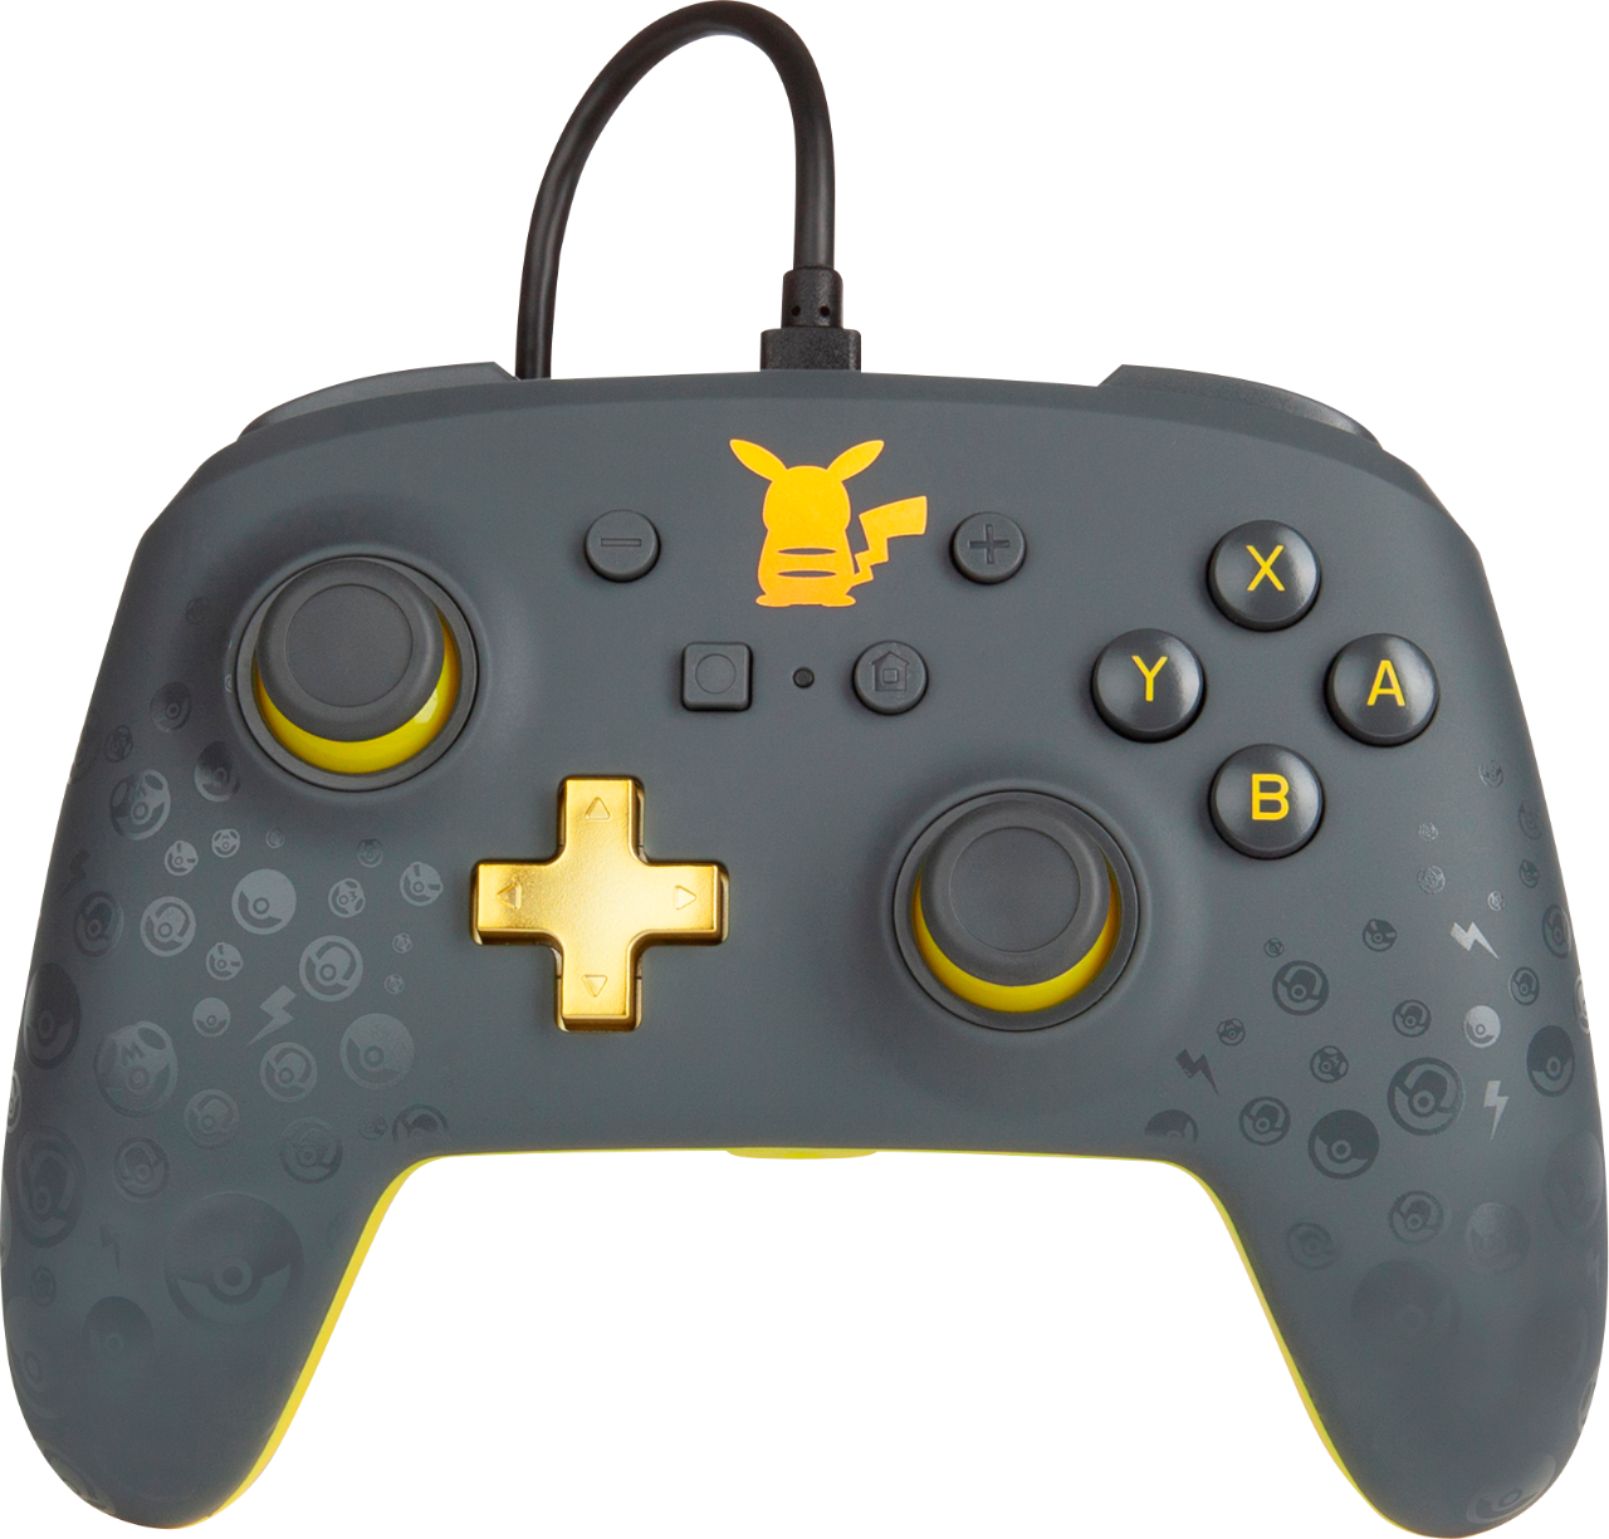 can you use any wired controller on switch